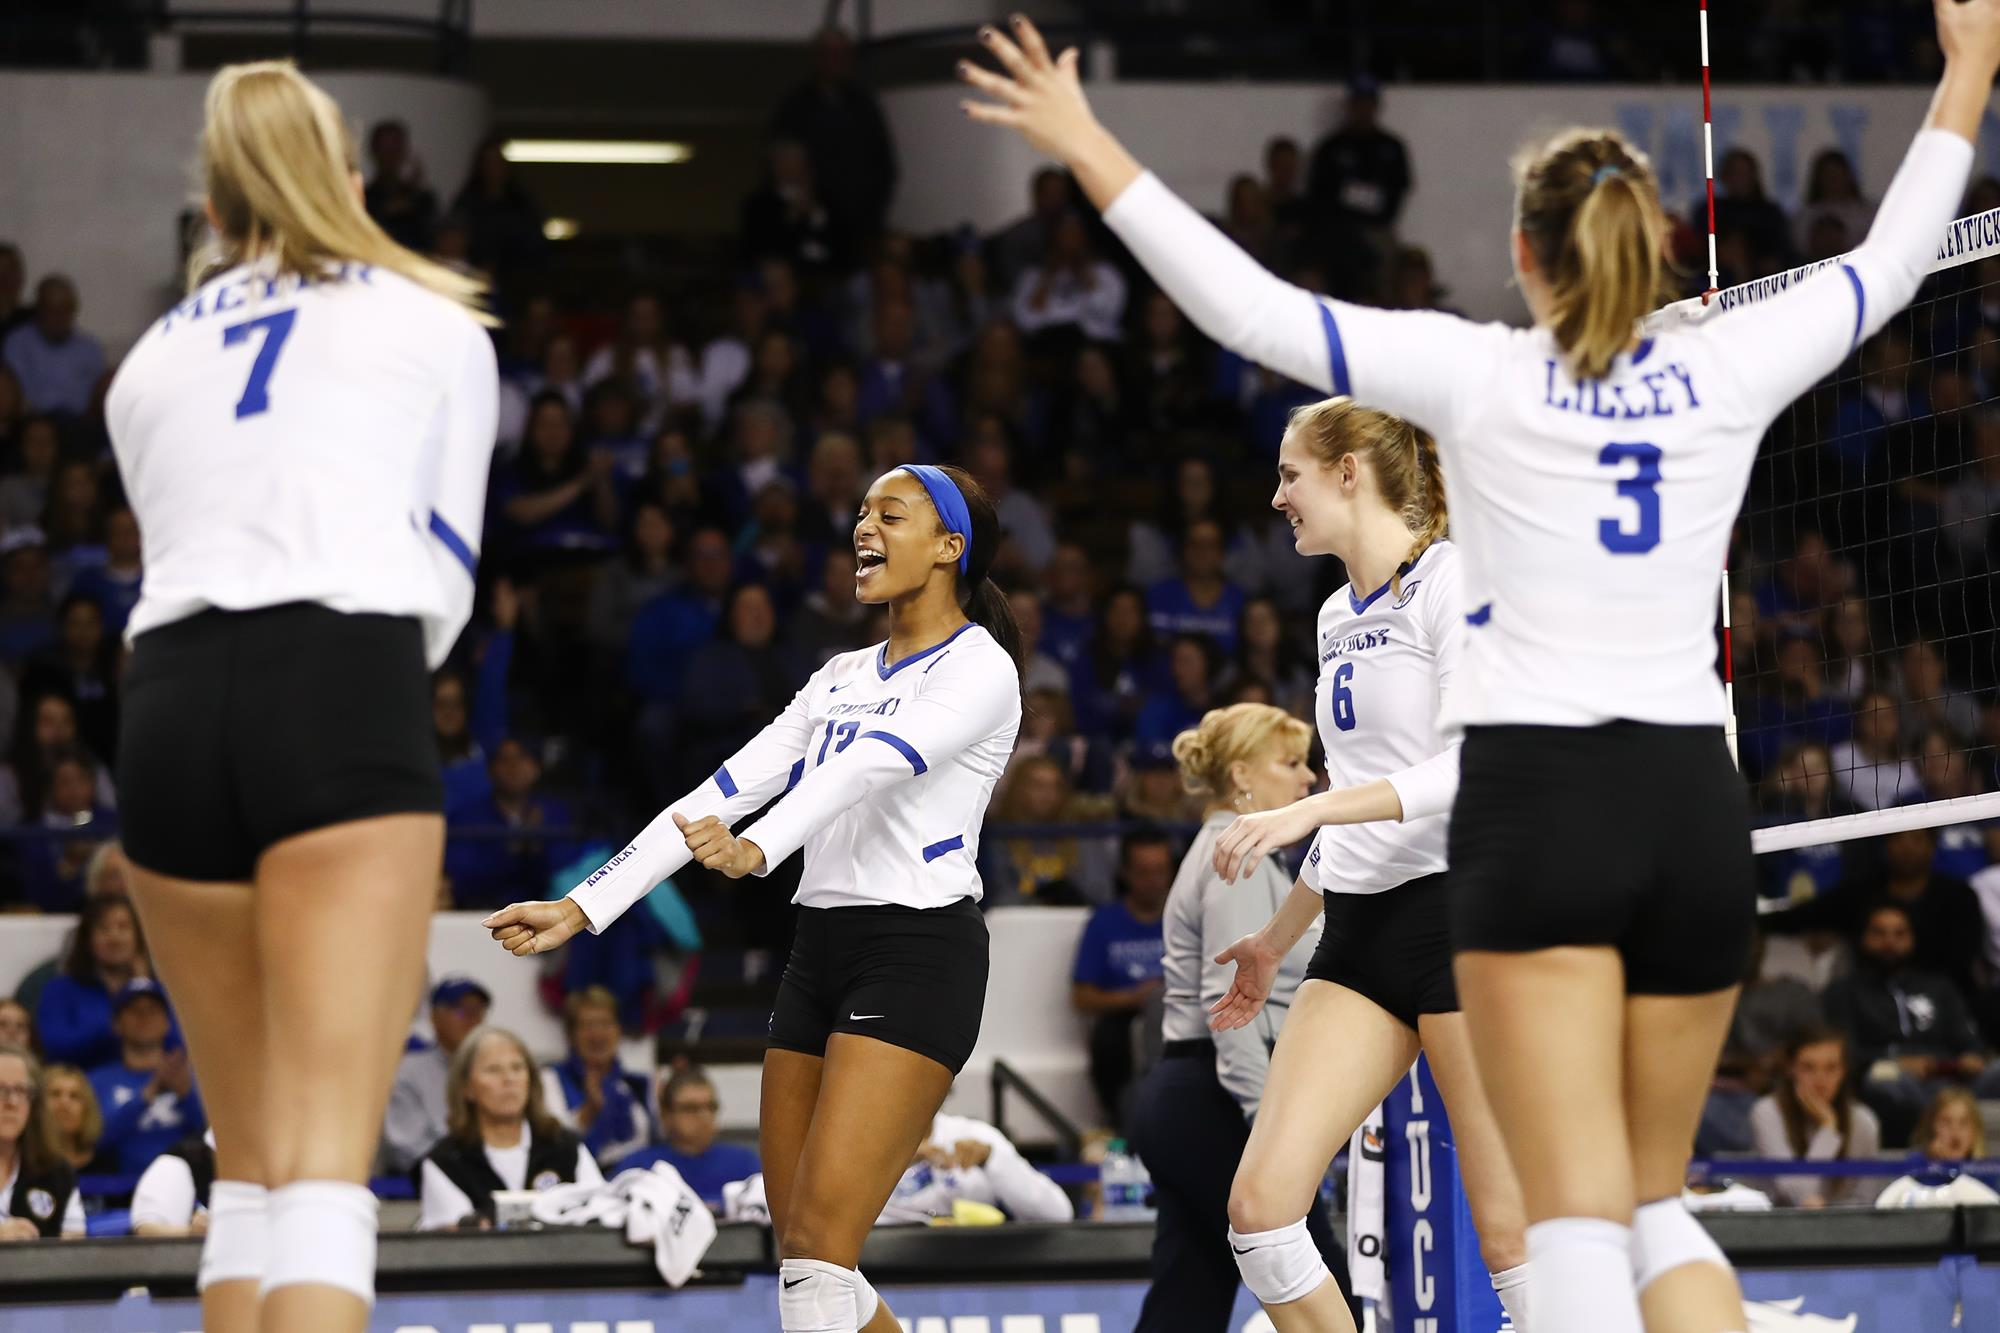 Leah Edmond, Gabby Curry Named SEC Players of the Week